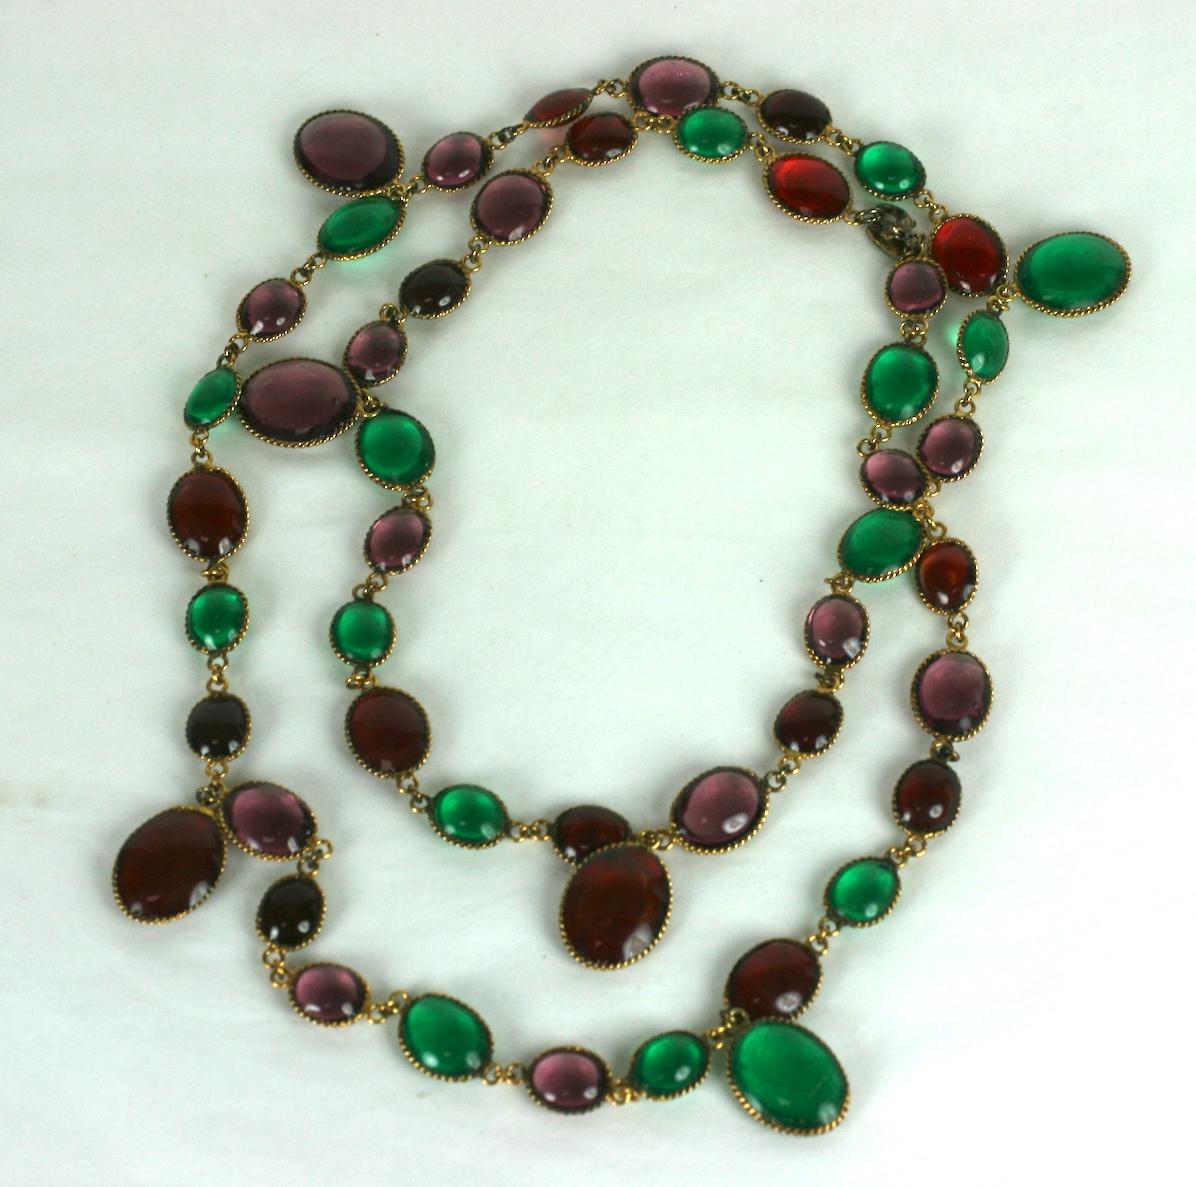 Maison Gripoix for Chanel pastille drop long necklace of deep ruby, emerald and amythest oval hand made stations in signature Gripoix poured glass enamel. Sautoir is handmade of fine braided wire and designed to be layered and wrapped around neck.